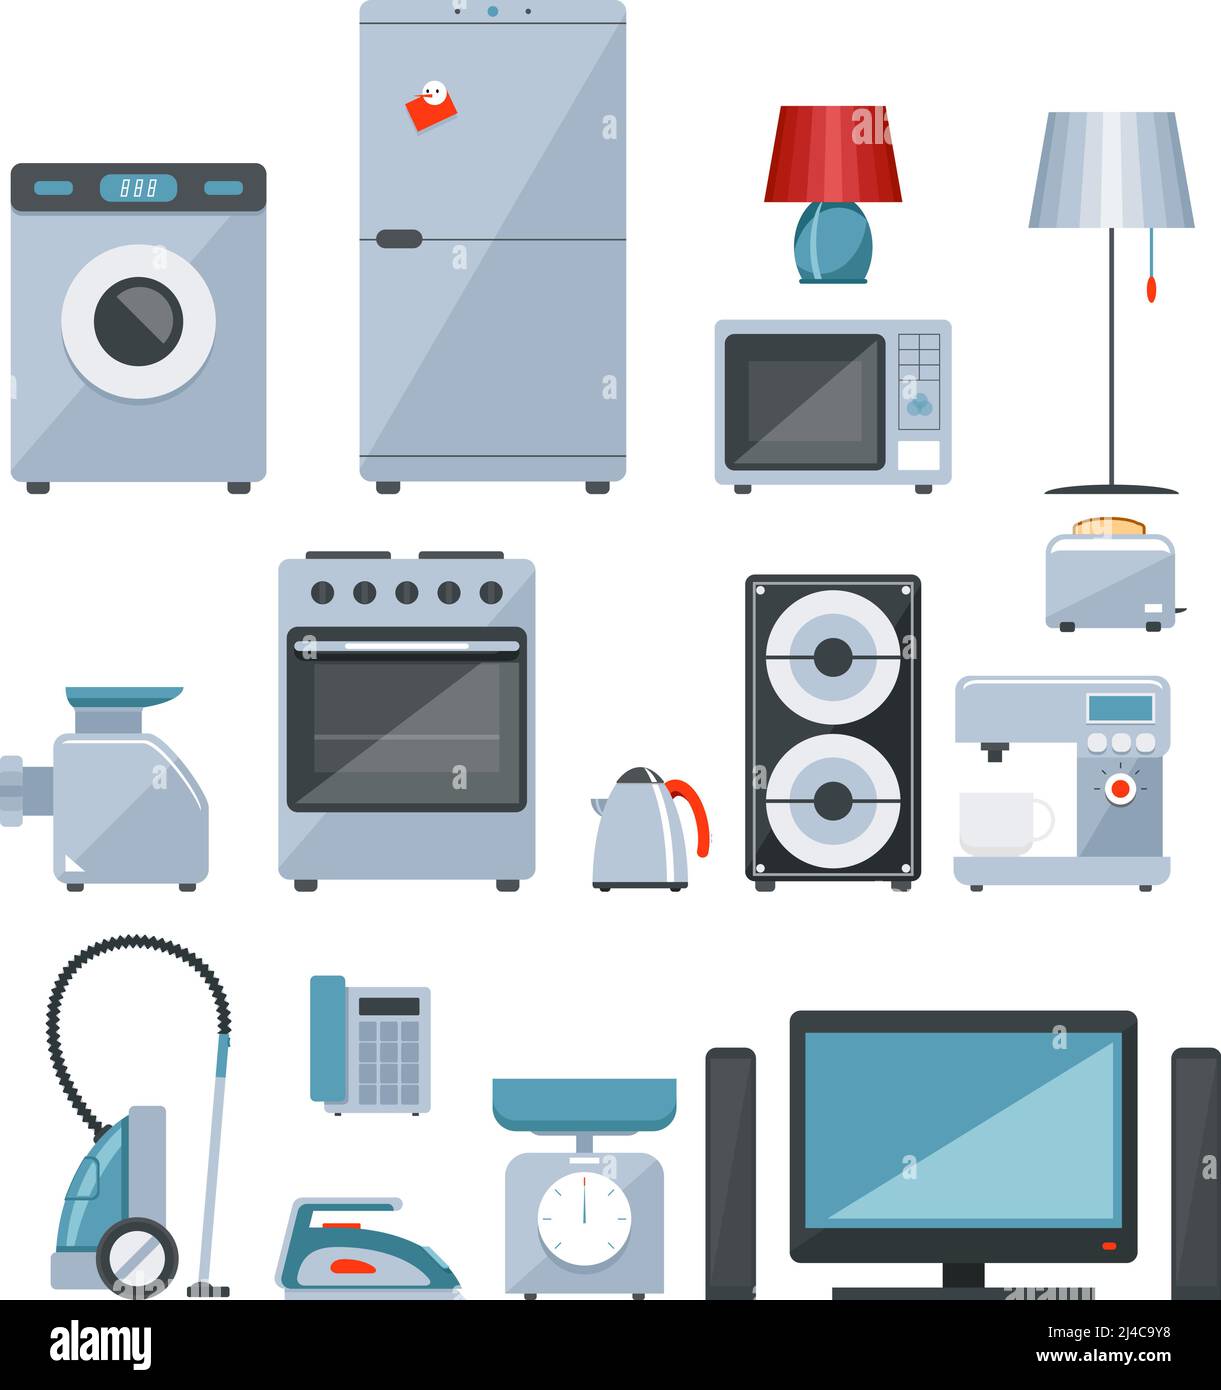 Colored icons of different types of home appliances on white background Stock Vector